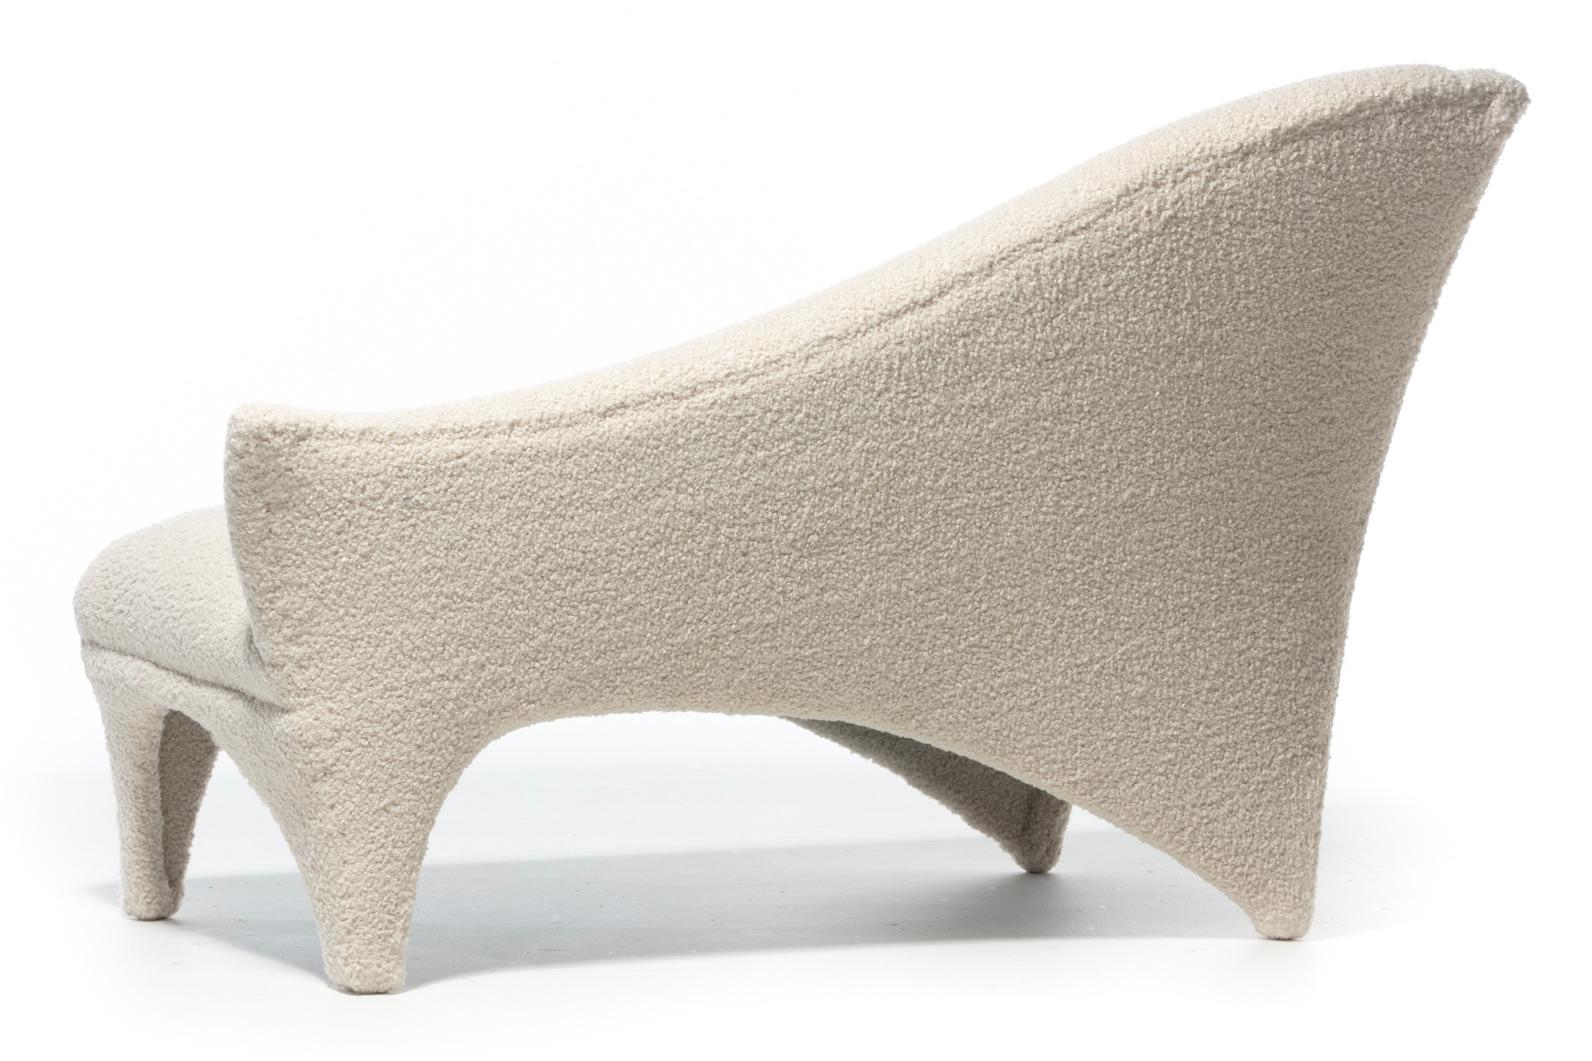 Vladimir Kagan A-Symmetric Settee in Ivory Bouclé by Directional, c. 1991 For Sale 2